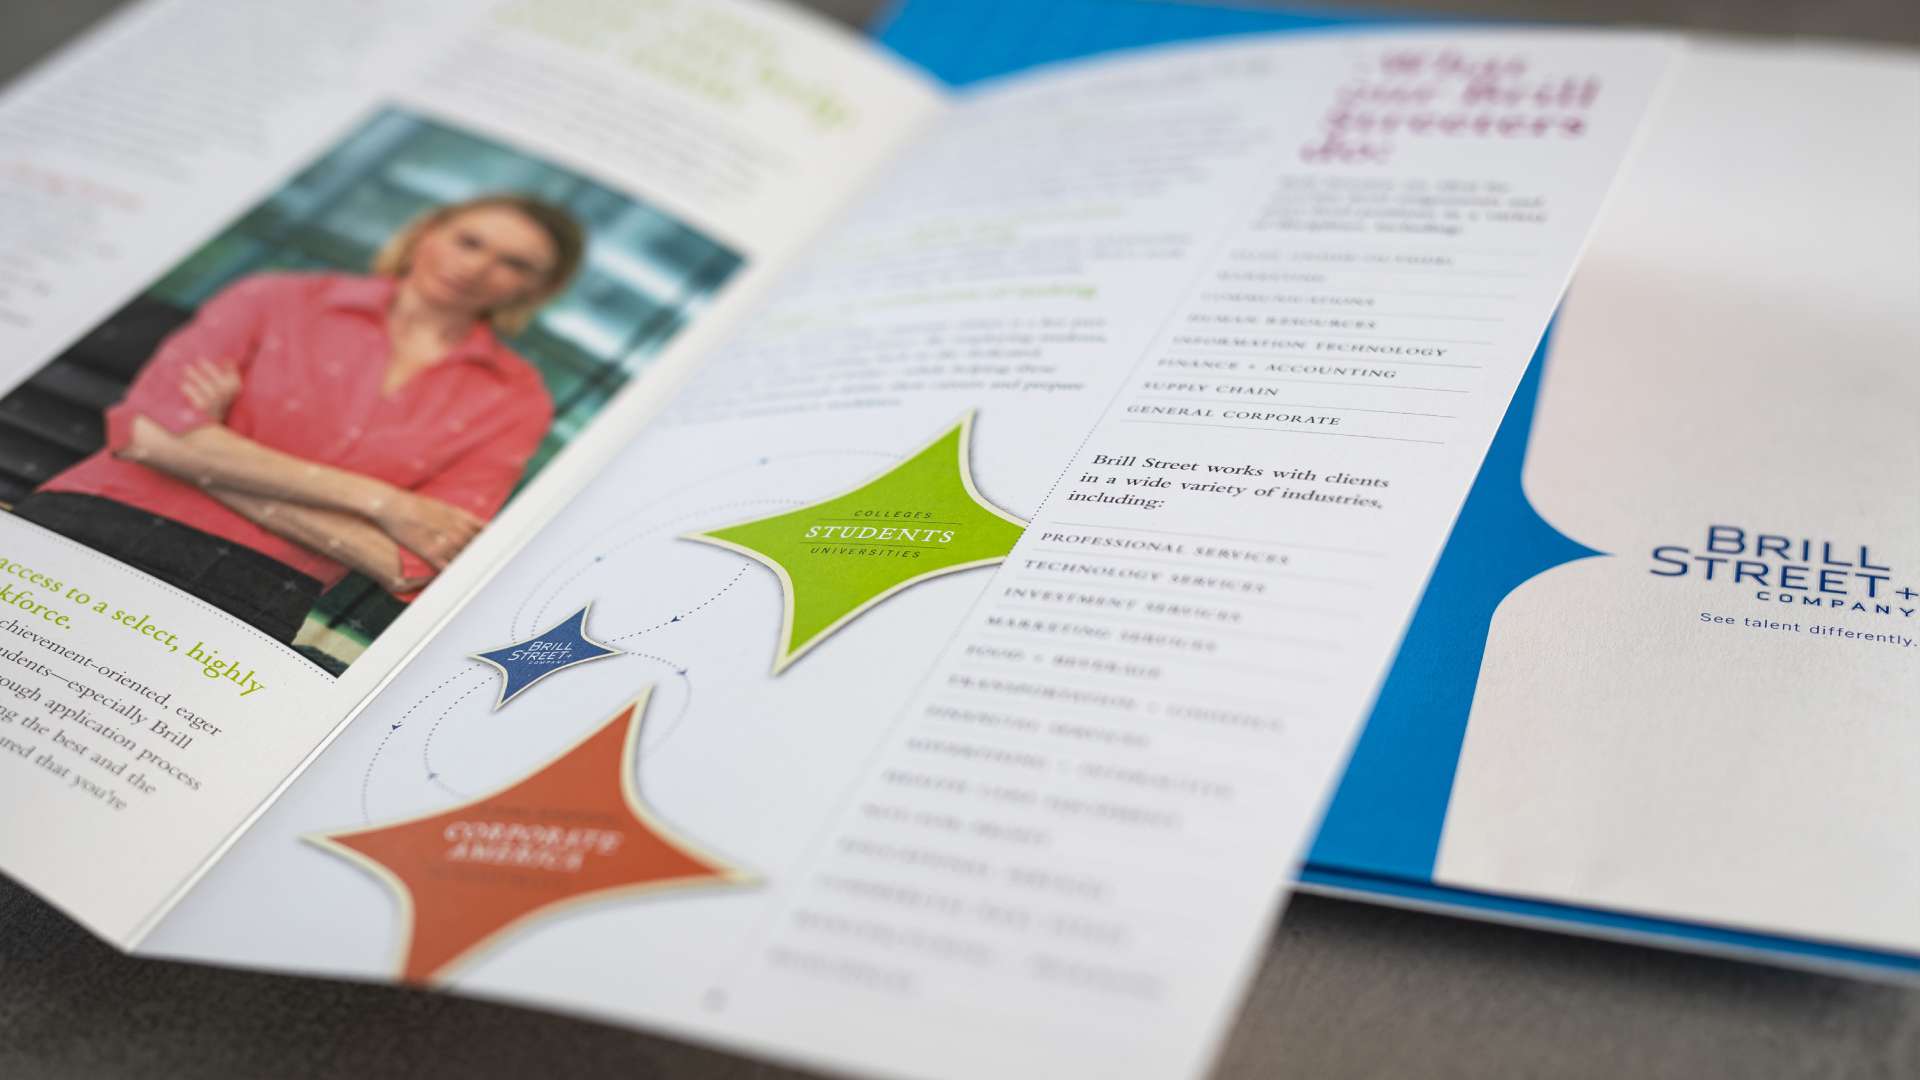 Print marketing collateral kit designed for Brill Street